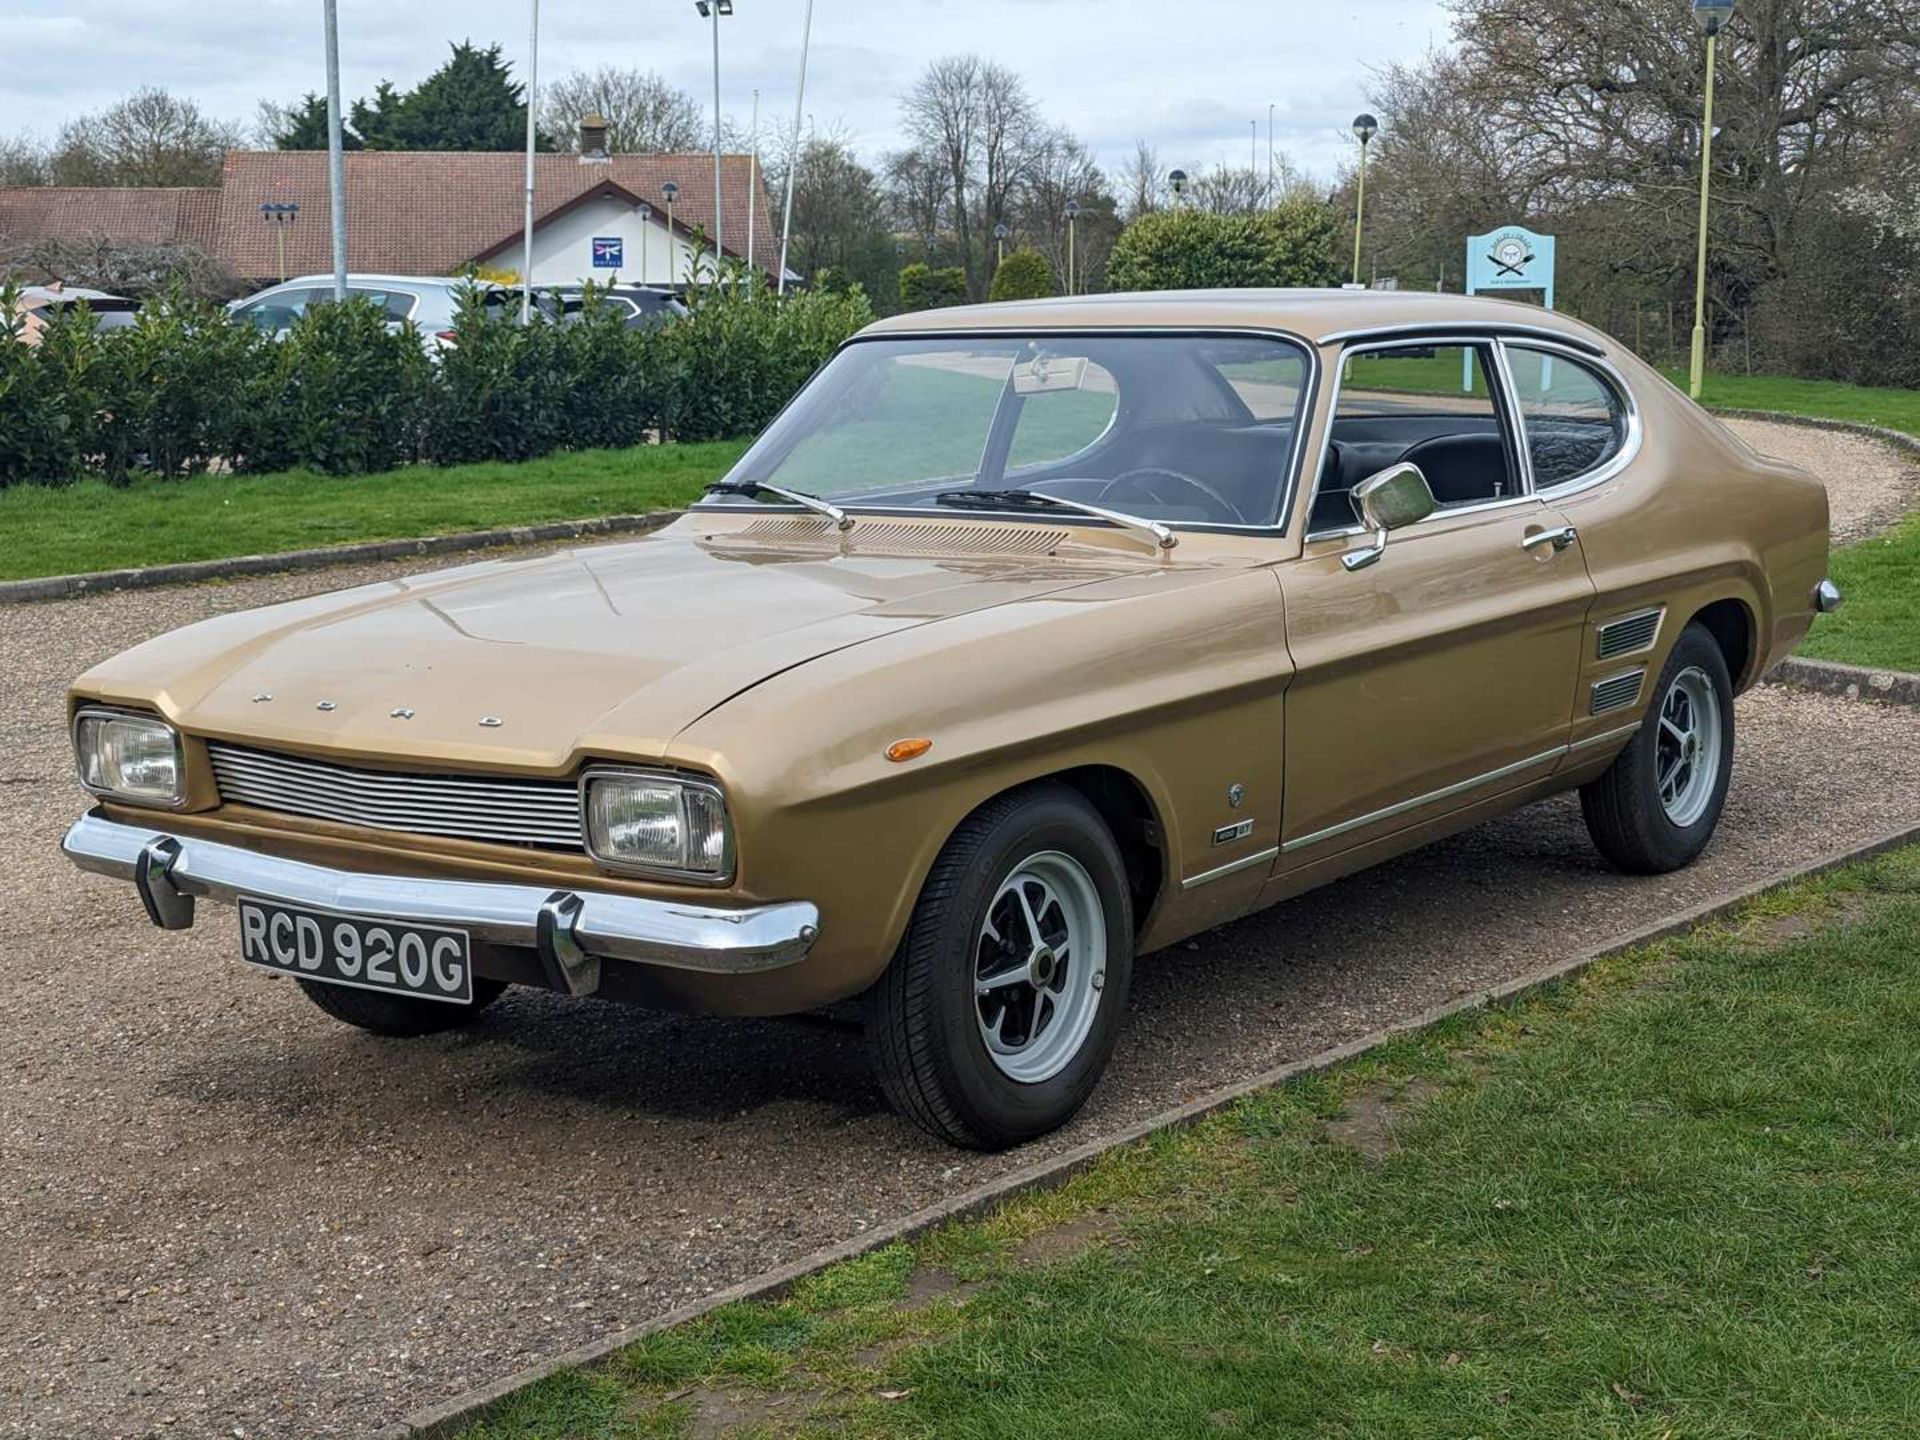 1969 FORD CAPRI 1600 GT LHD - Image 3 of 26